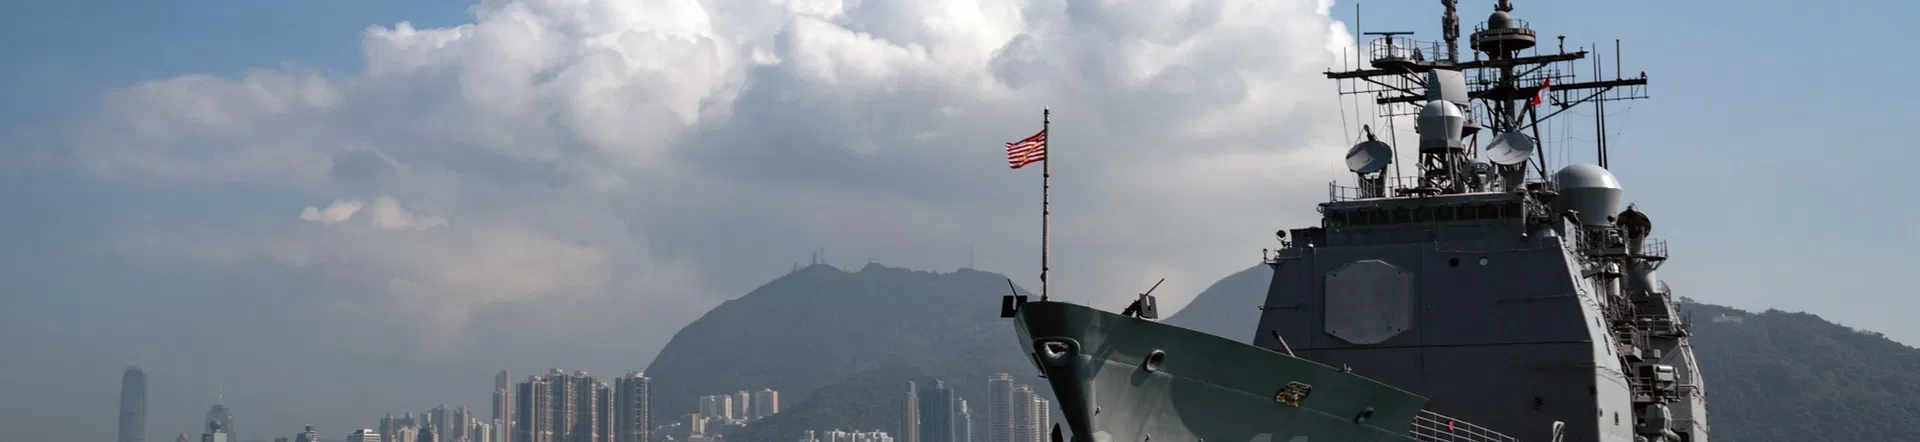 China’s Missiles Warn U.S. Aircraft Carriers to Stay Away